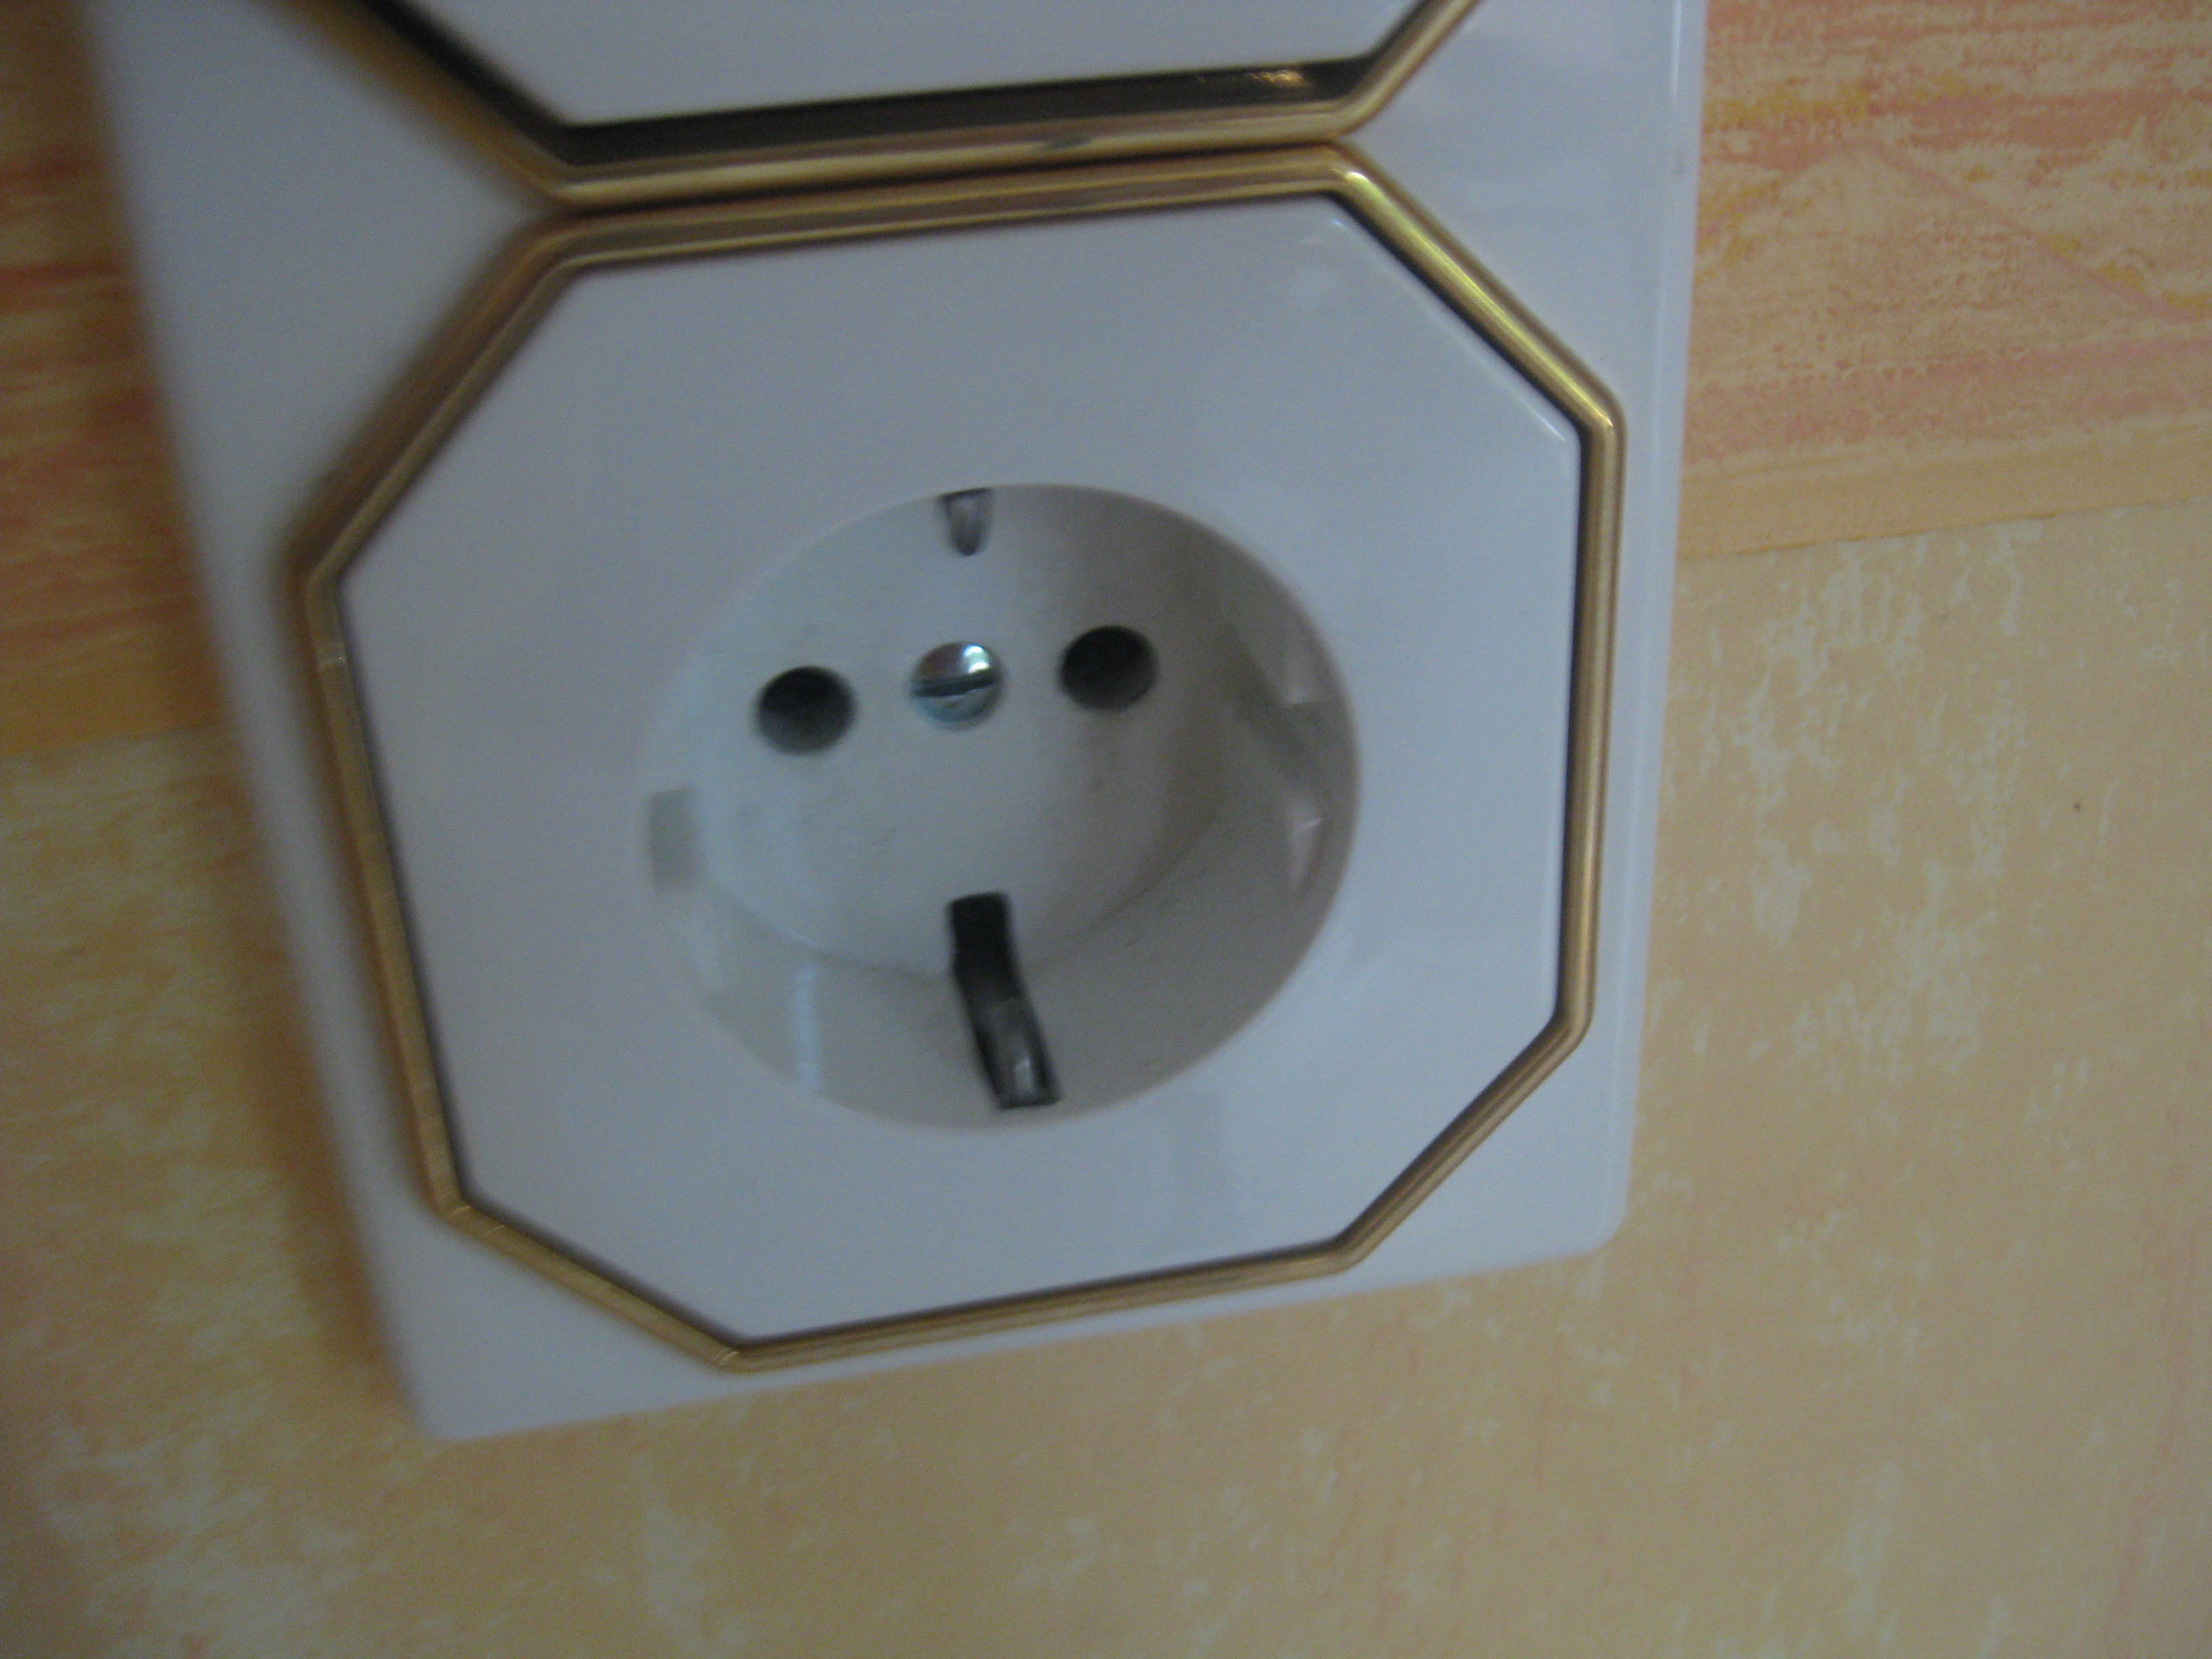 Why do electrical outlets get hot to the touch?